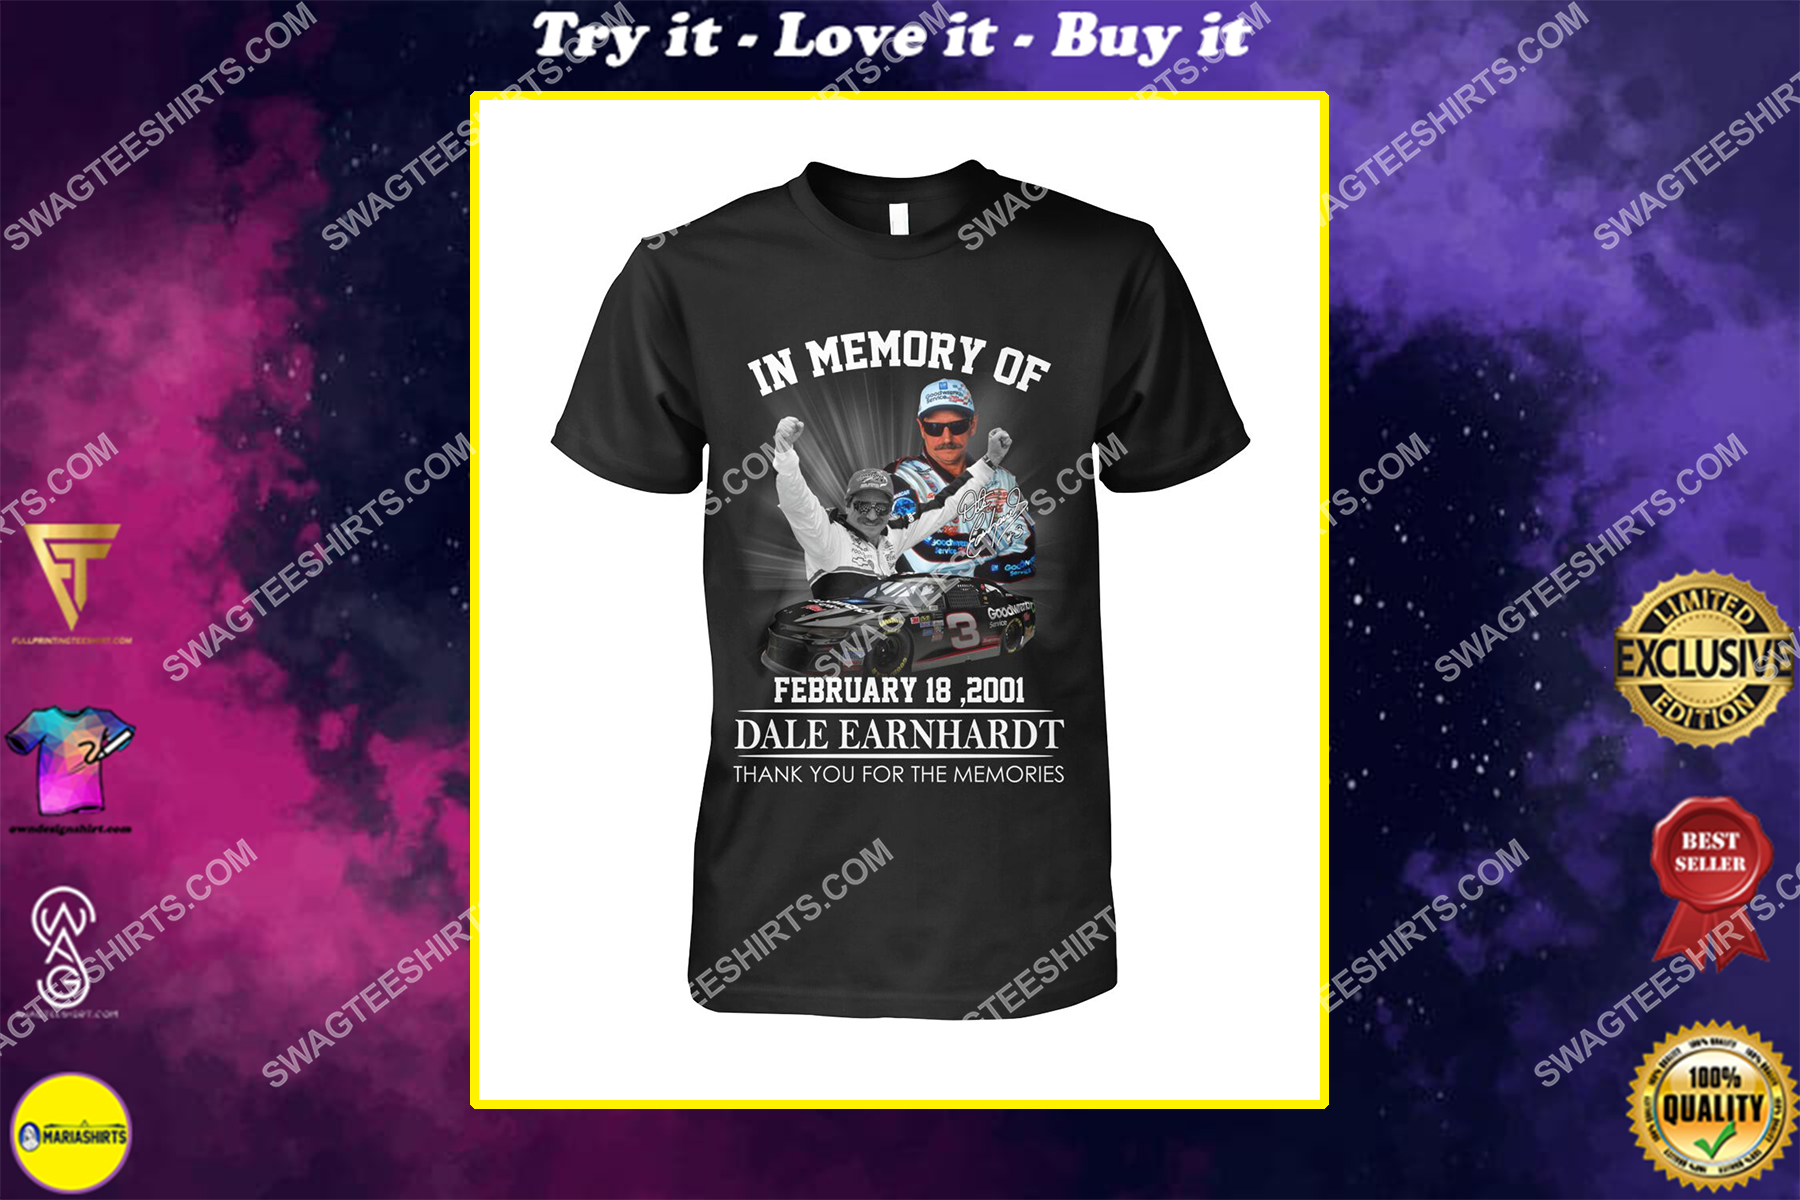 in memory of dale earnhardt thank you for memories shirt